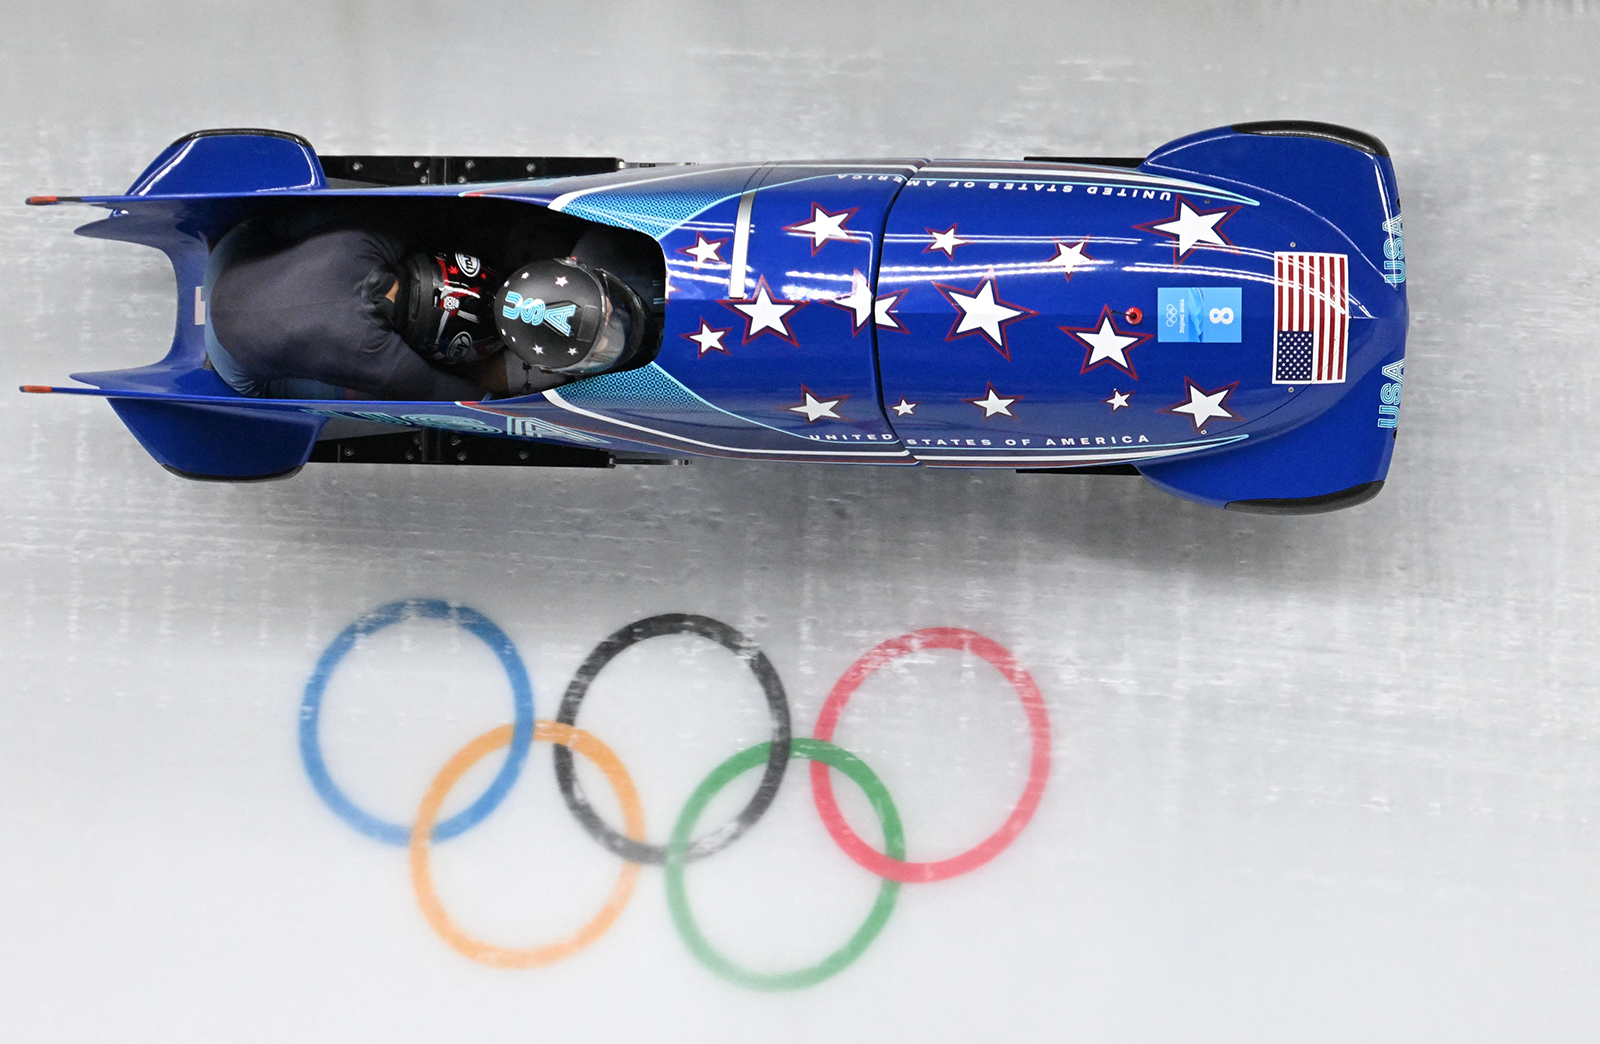 USA's Elana Meyers Taylor and Sylvia Hoffman compete in the 2-woman bobsleigh event on February 18.